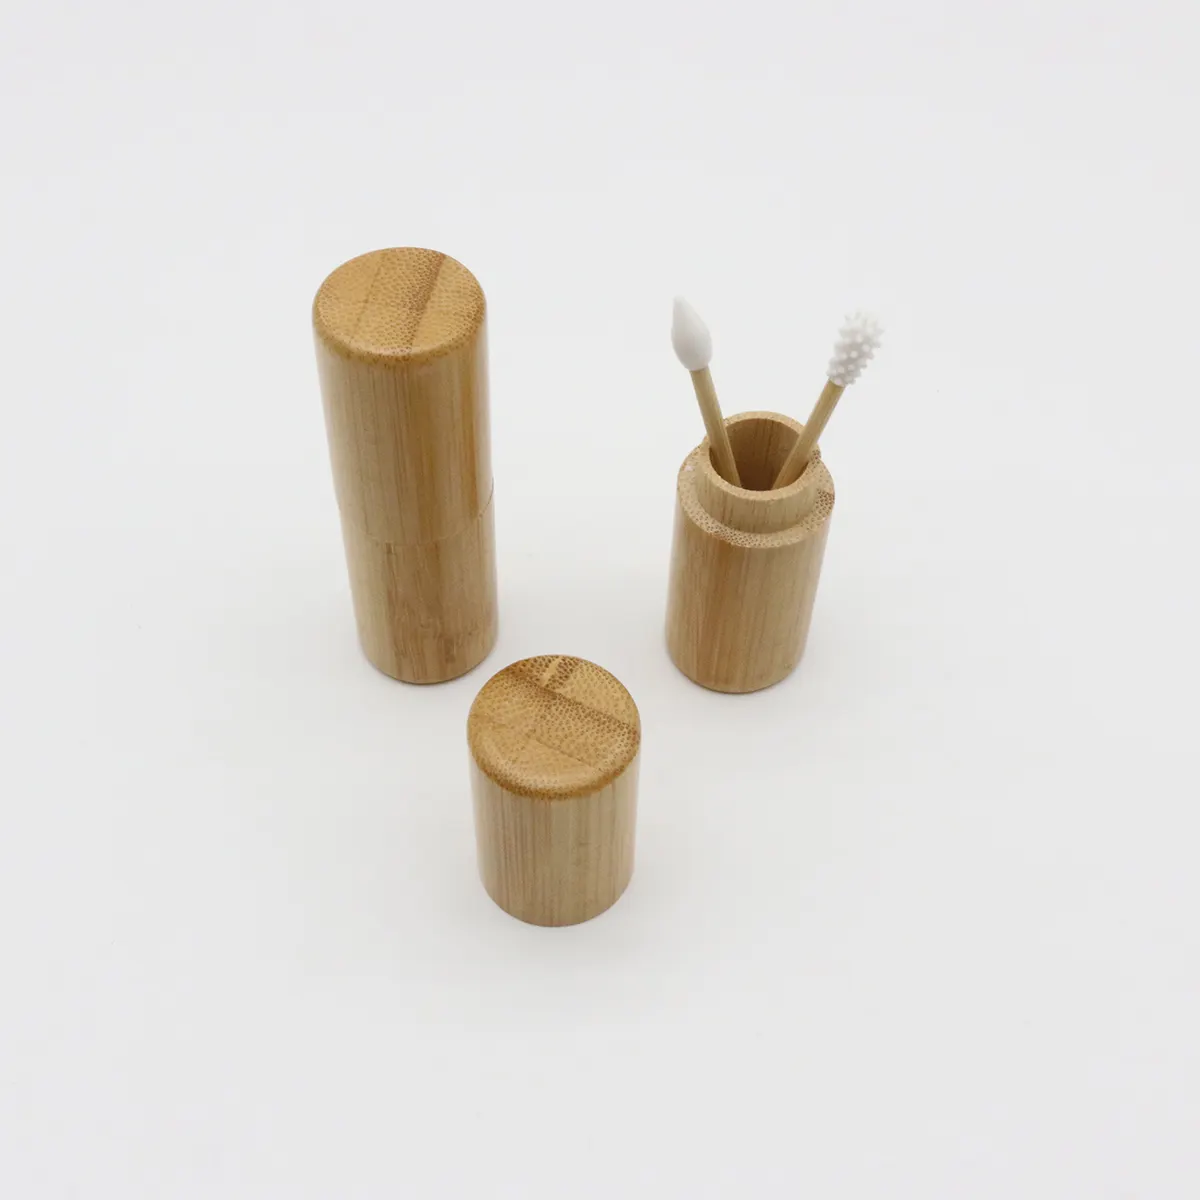 Factory Drectly Portable Double-headed Reusable Bamboo Ear Sticks with Bamboo Box Bamboo Silicone Cotton Swabs Silicone Ear buds